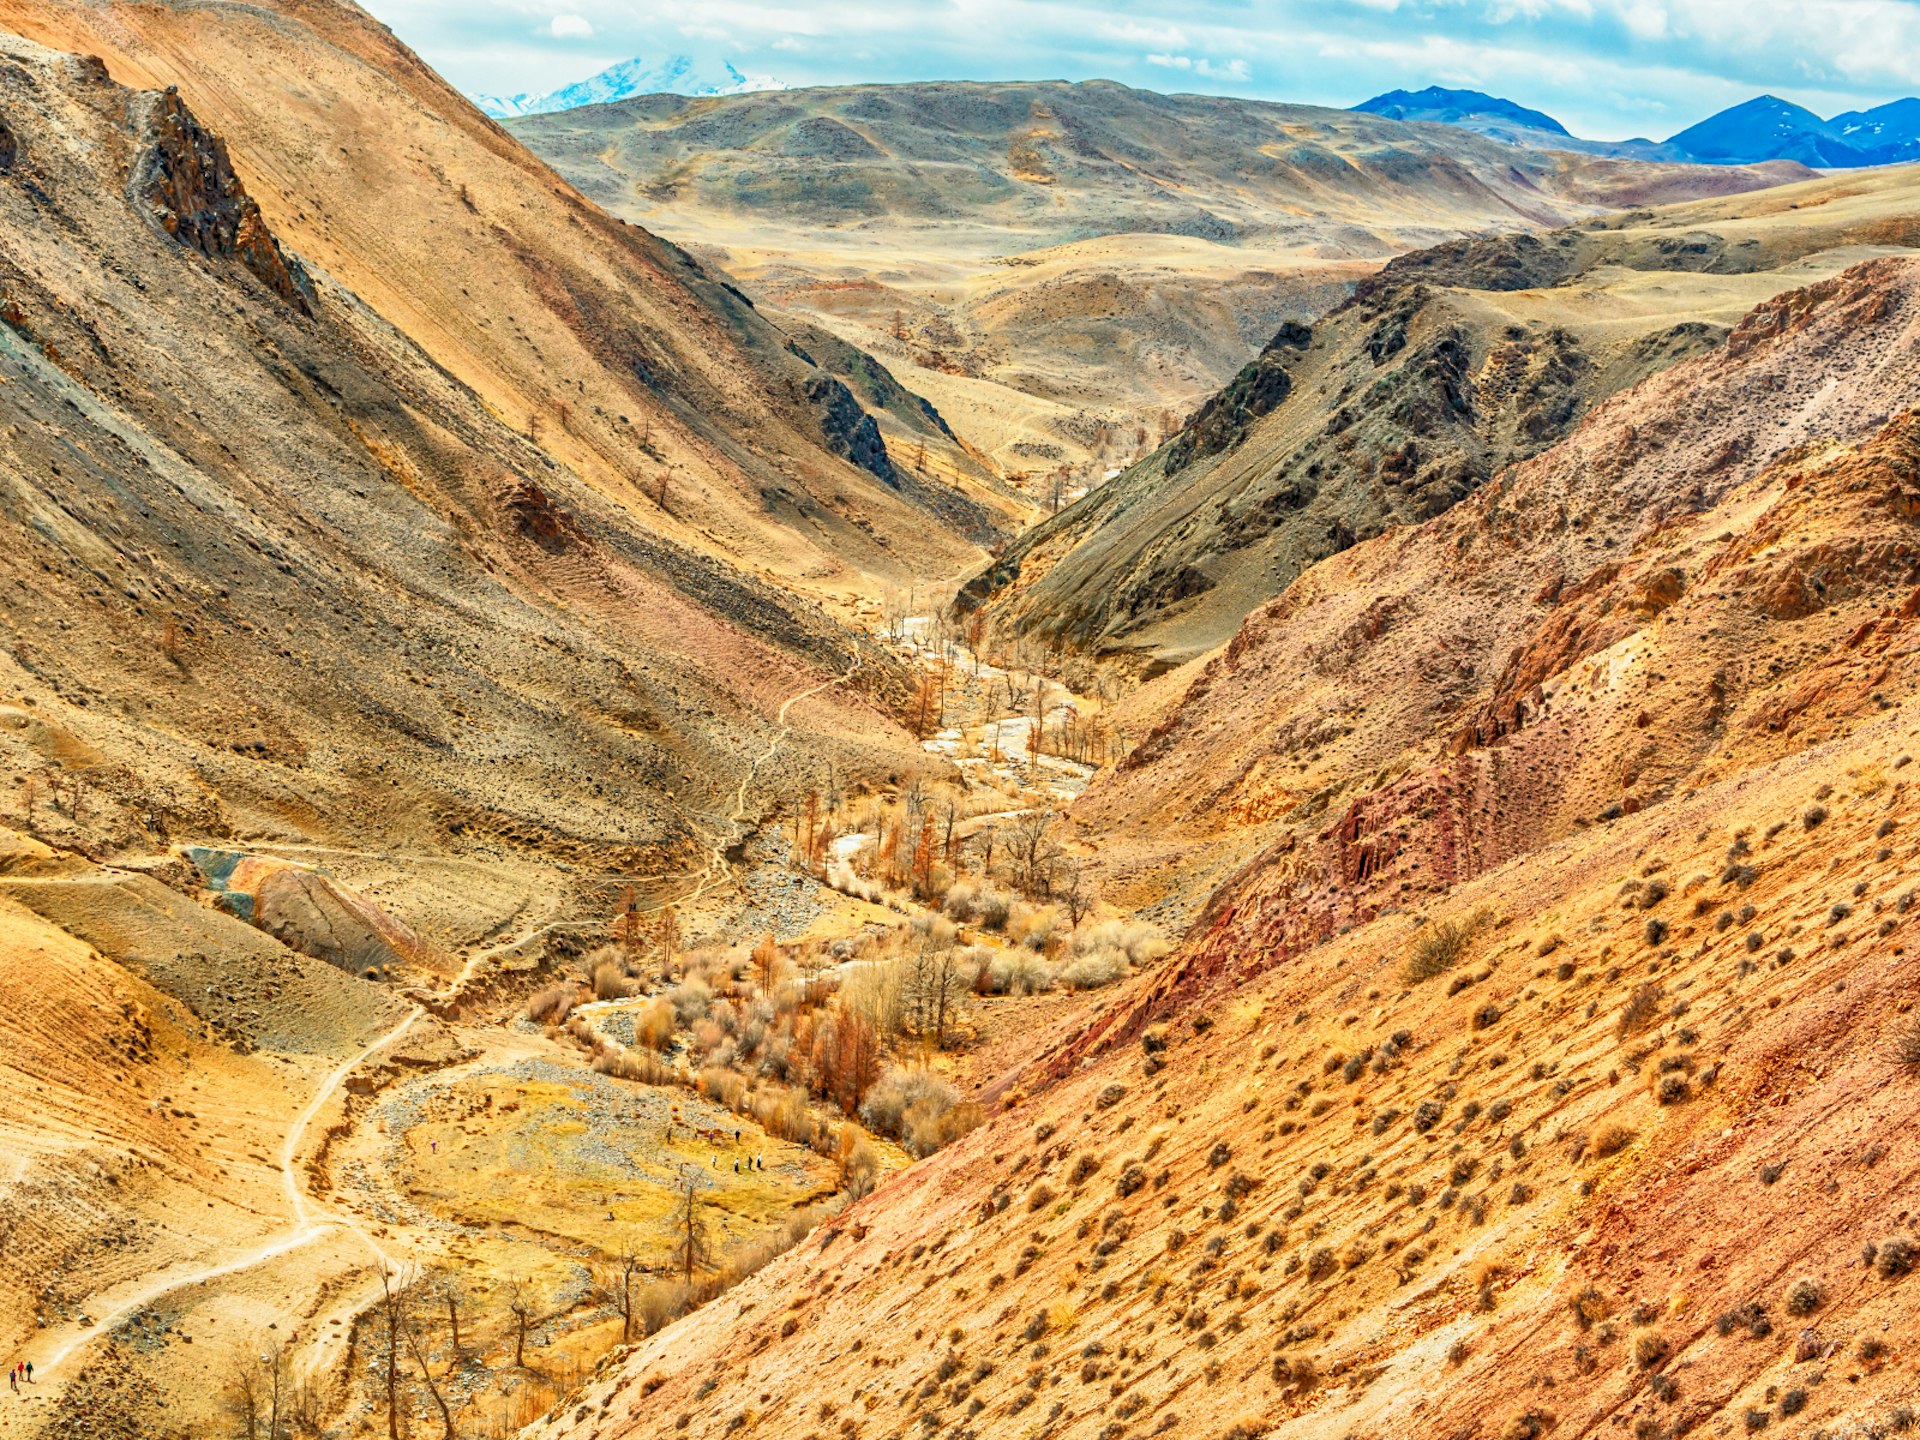 The colourful vistas of the rugged Kyzyl-Chin Mountains in Russia © Mademoiselle de Erotic / Shutterstock